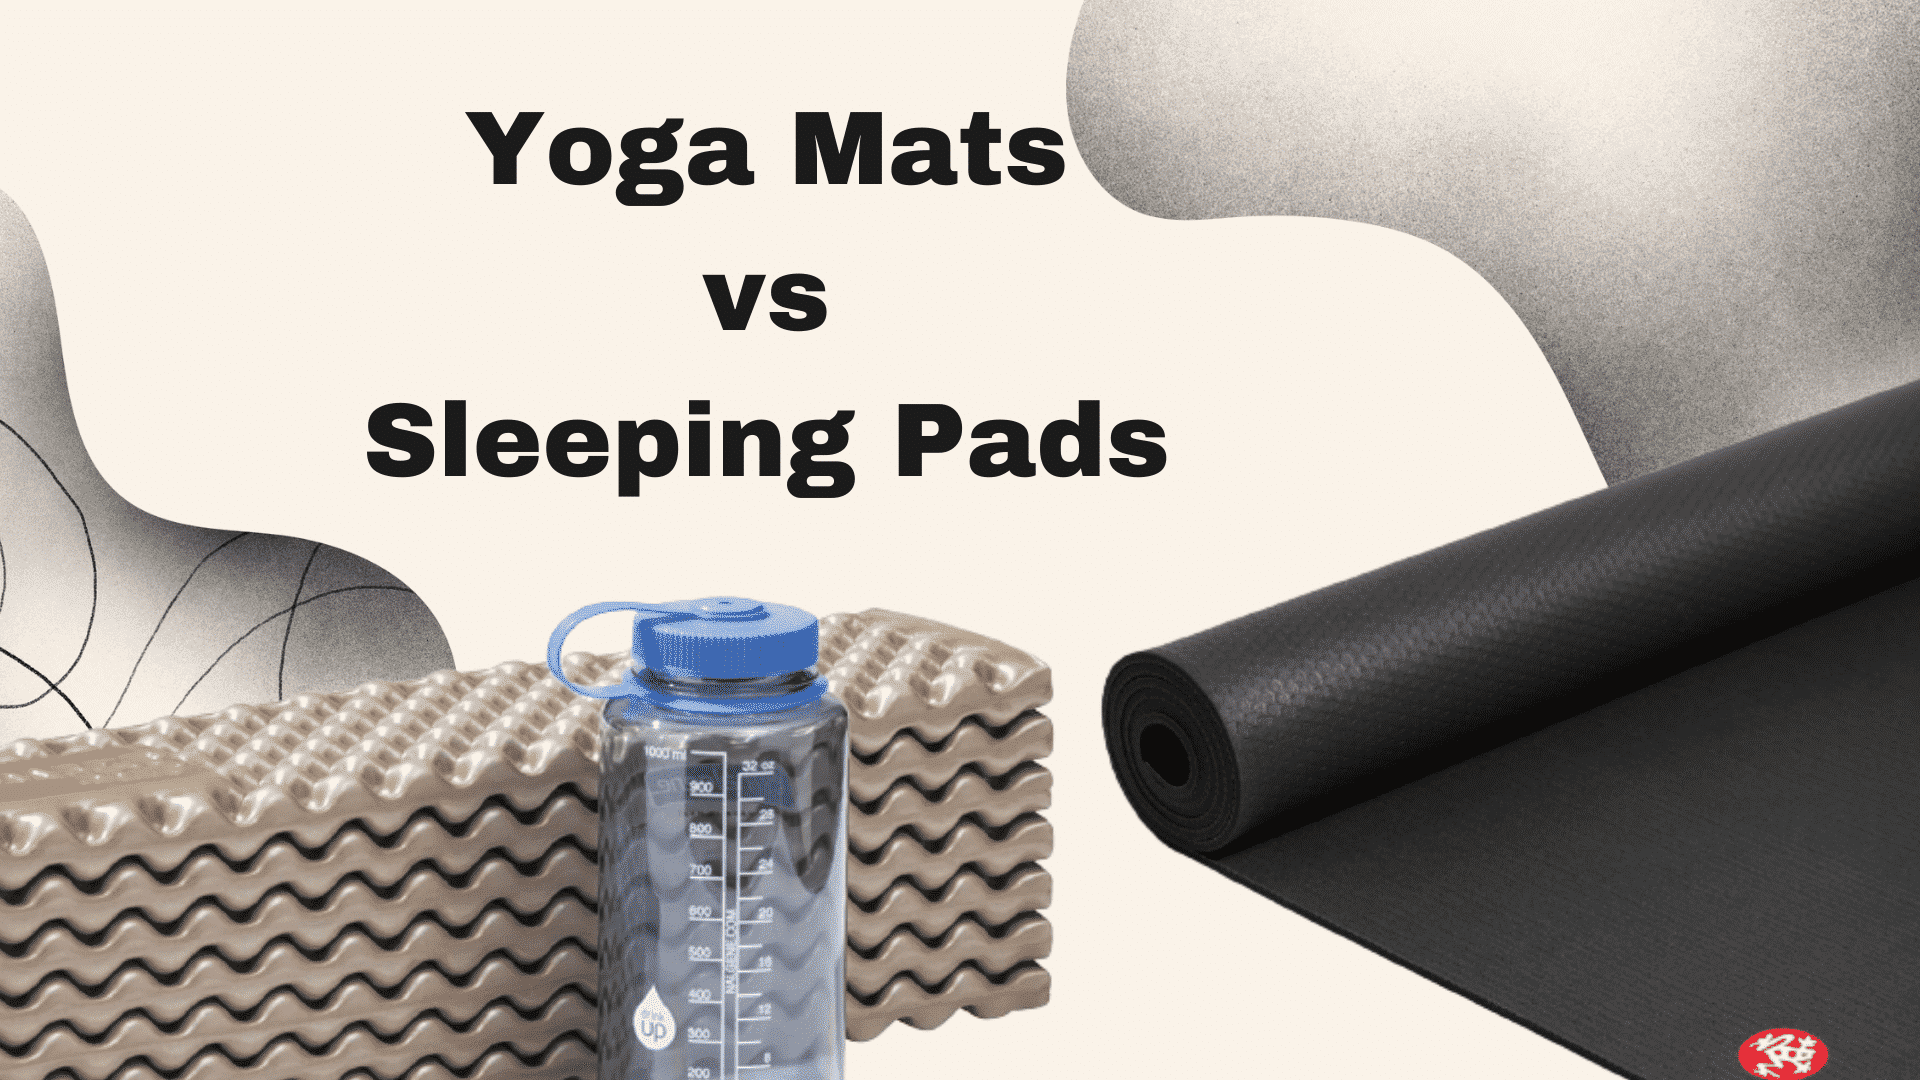 Can You Use a Yoga Mat as a Sleeping pad?